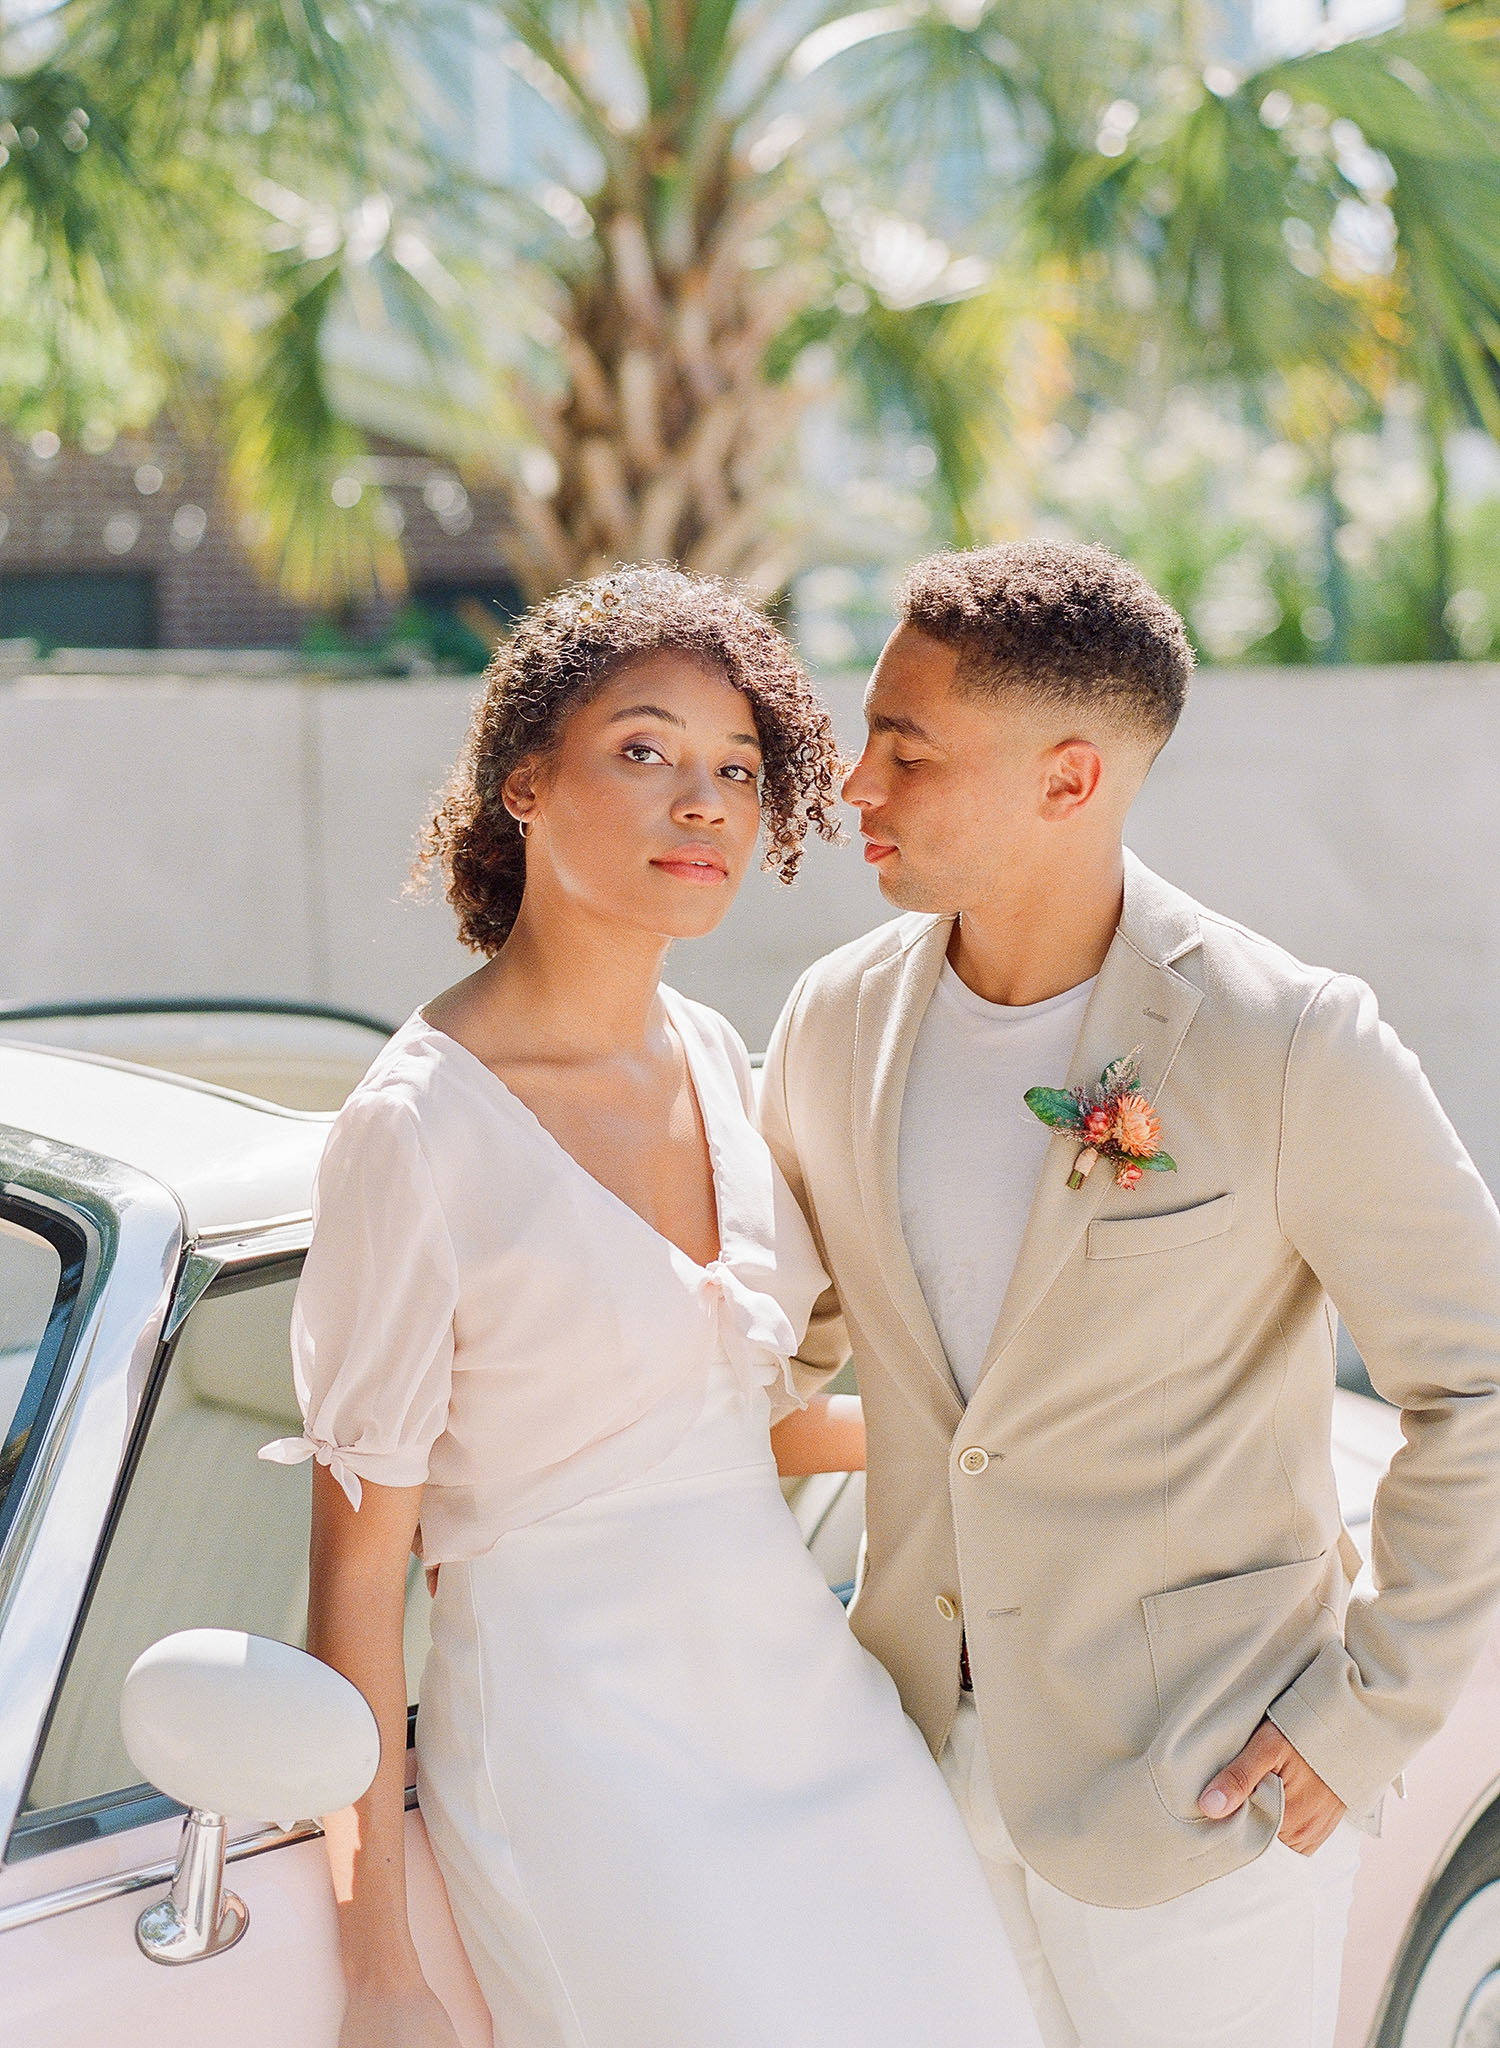 Emma Katzka crepe wedding dress with a delicate blush overlay and a tan suit jacket from M. Dumas & Sons, captured by Clay Austin and planned by Willow and Oak with fashion styling by The Edit Collective